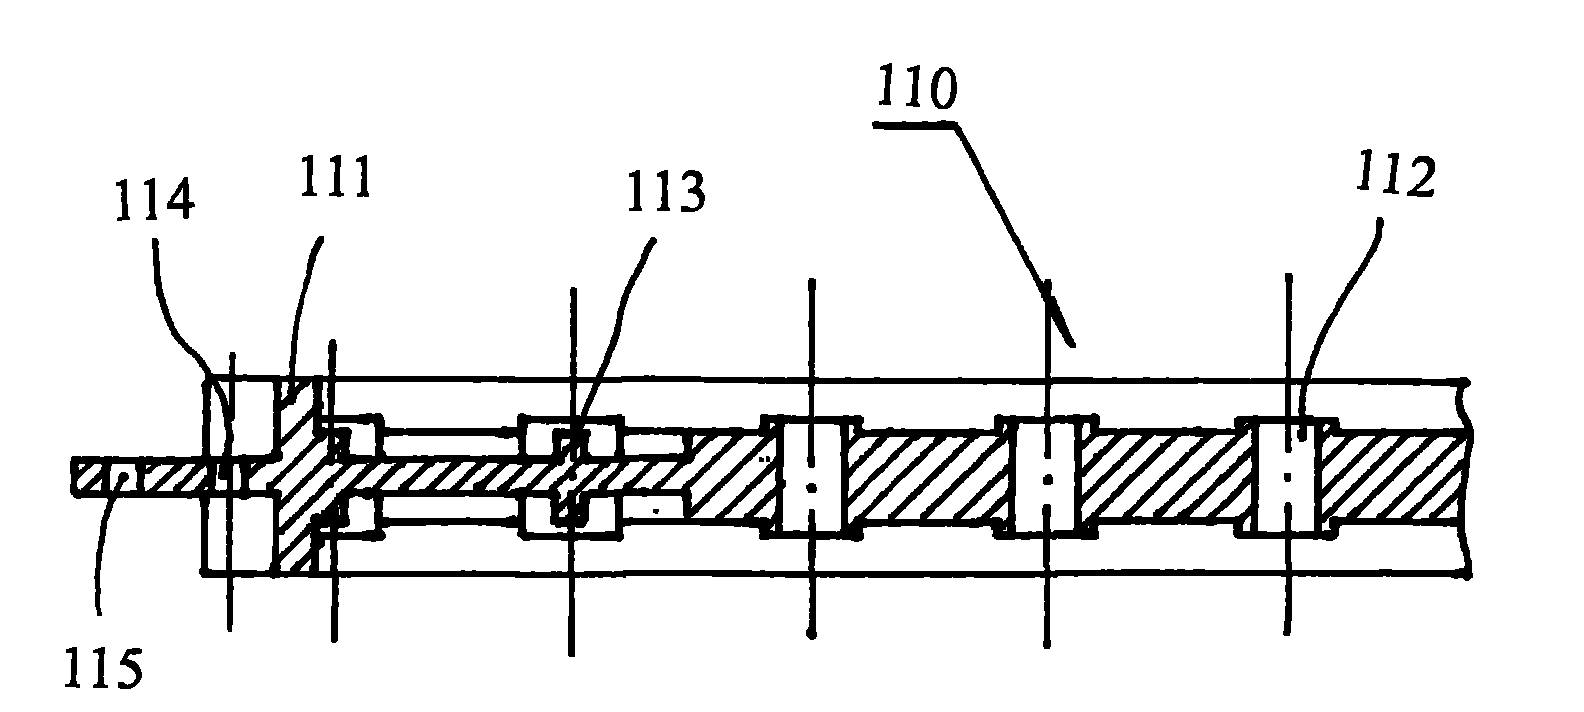 Bipolar plate capable of doing work on double surfaces and high-energy battery thereof